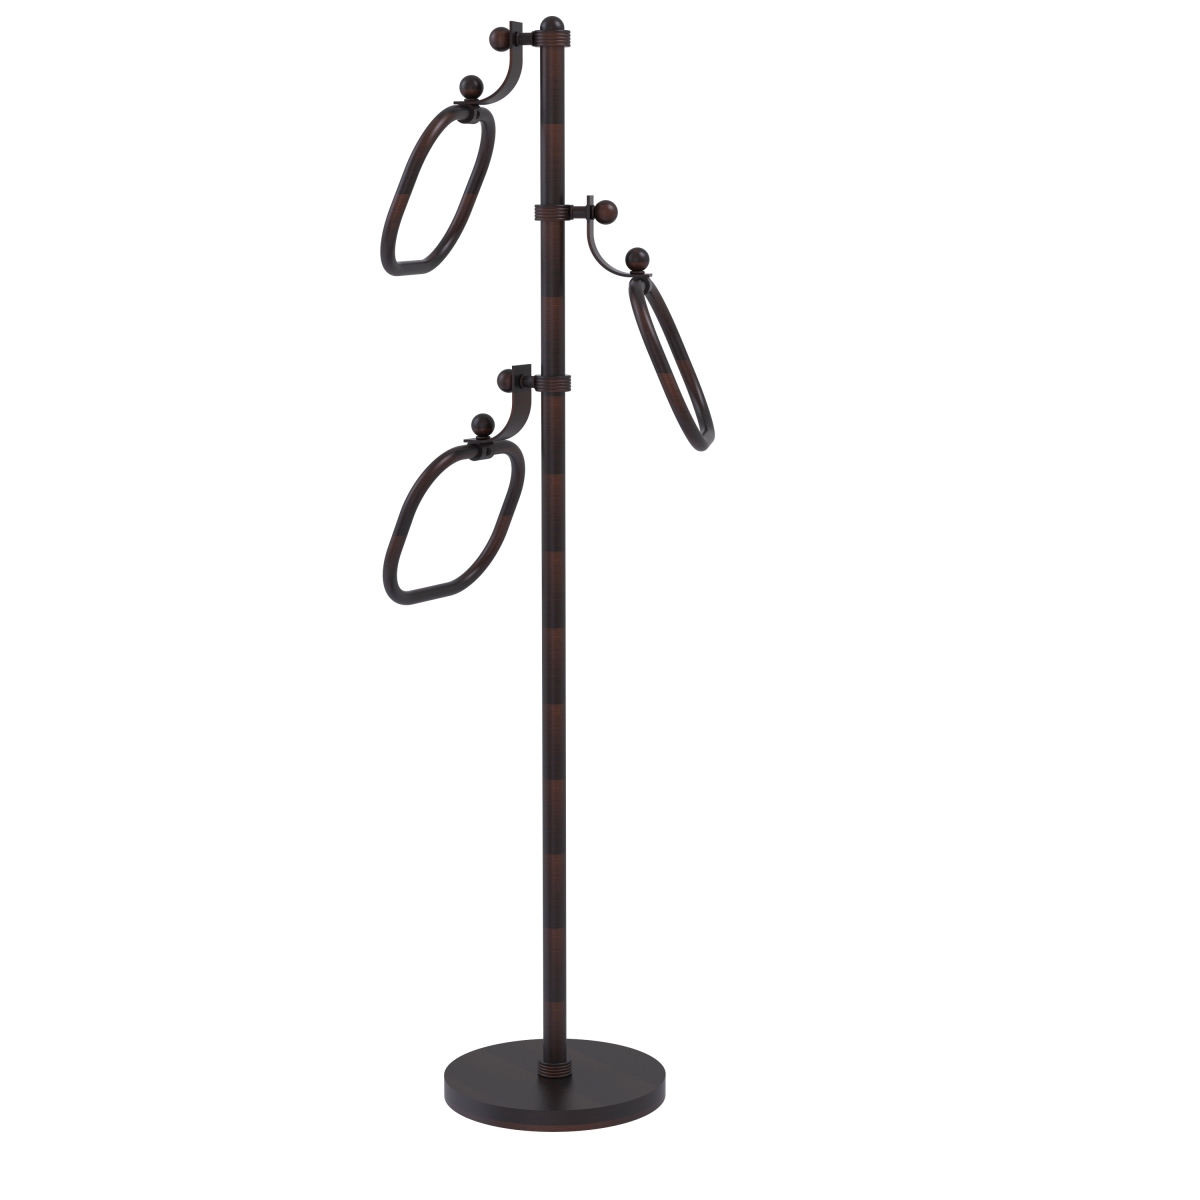 Allied Brass TS-83G-VB 9 in. Towel Stand with Oval Towel Rings, Venetian Bronze - 49 x 10.5 x 14 in.